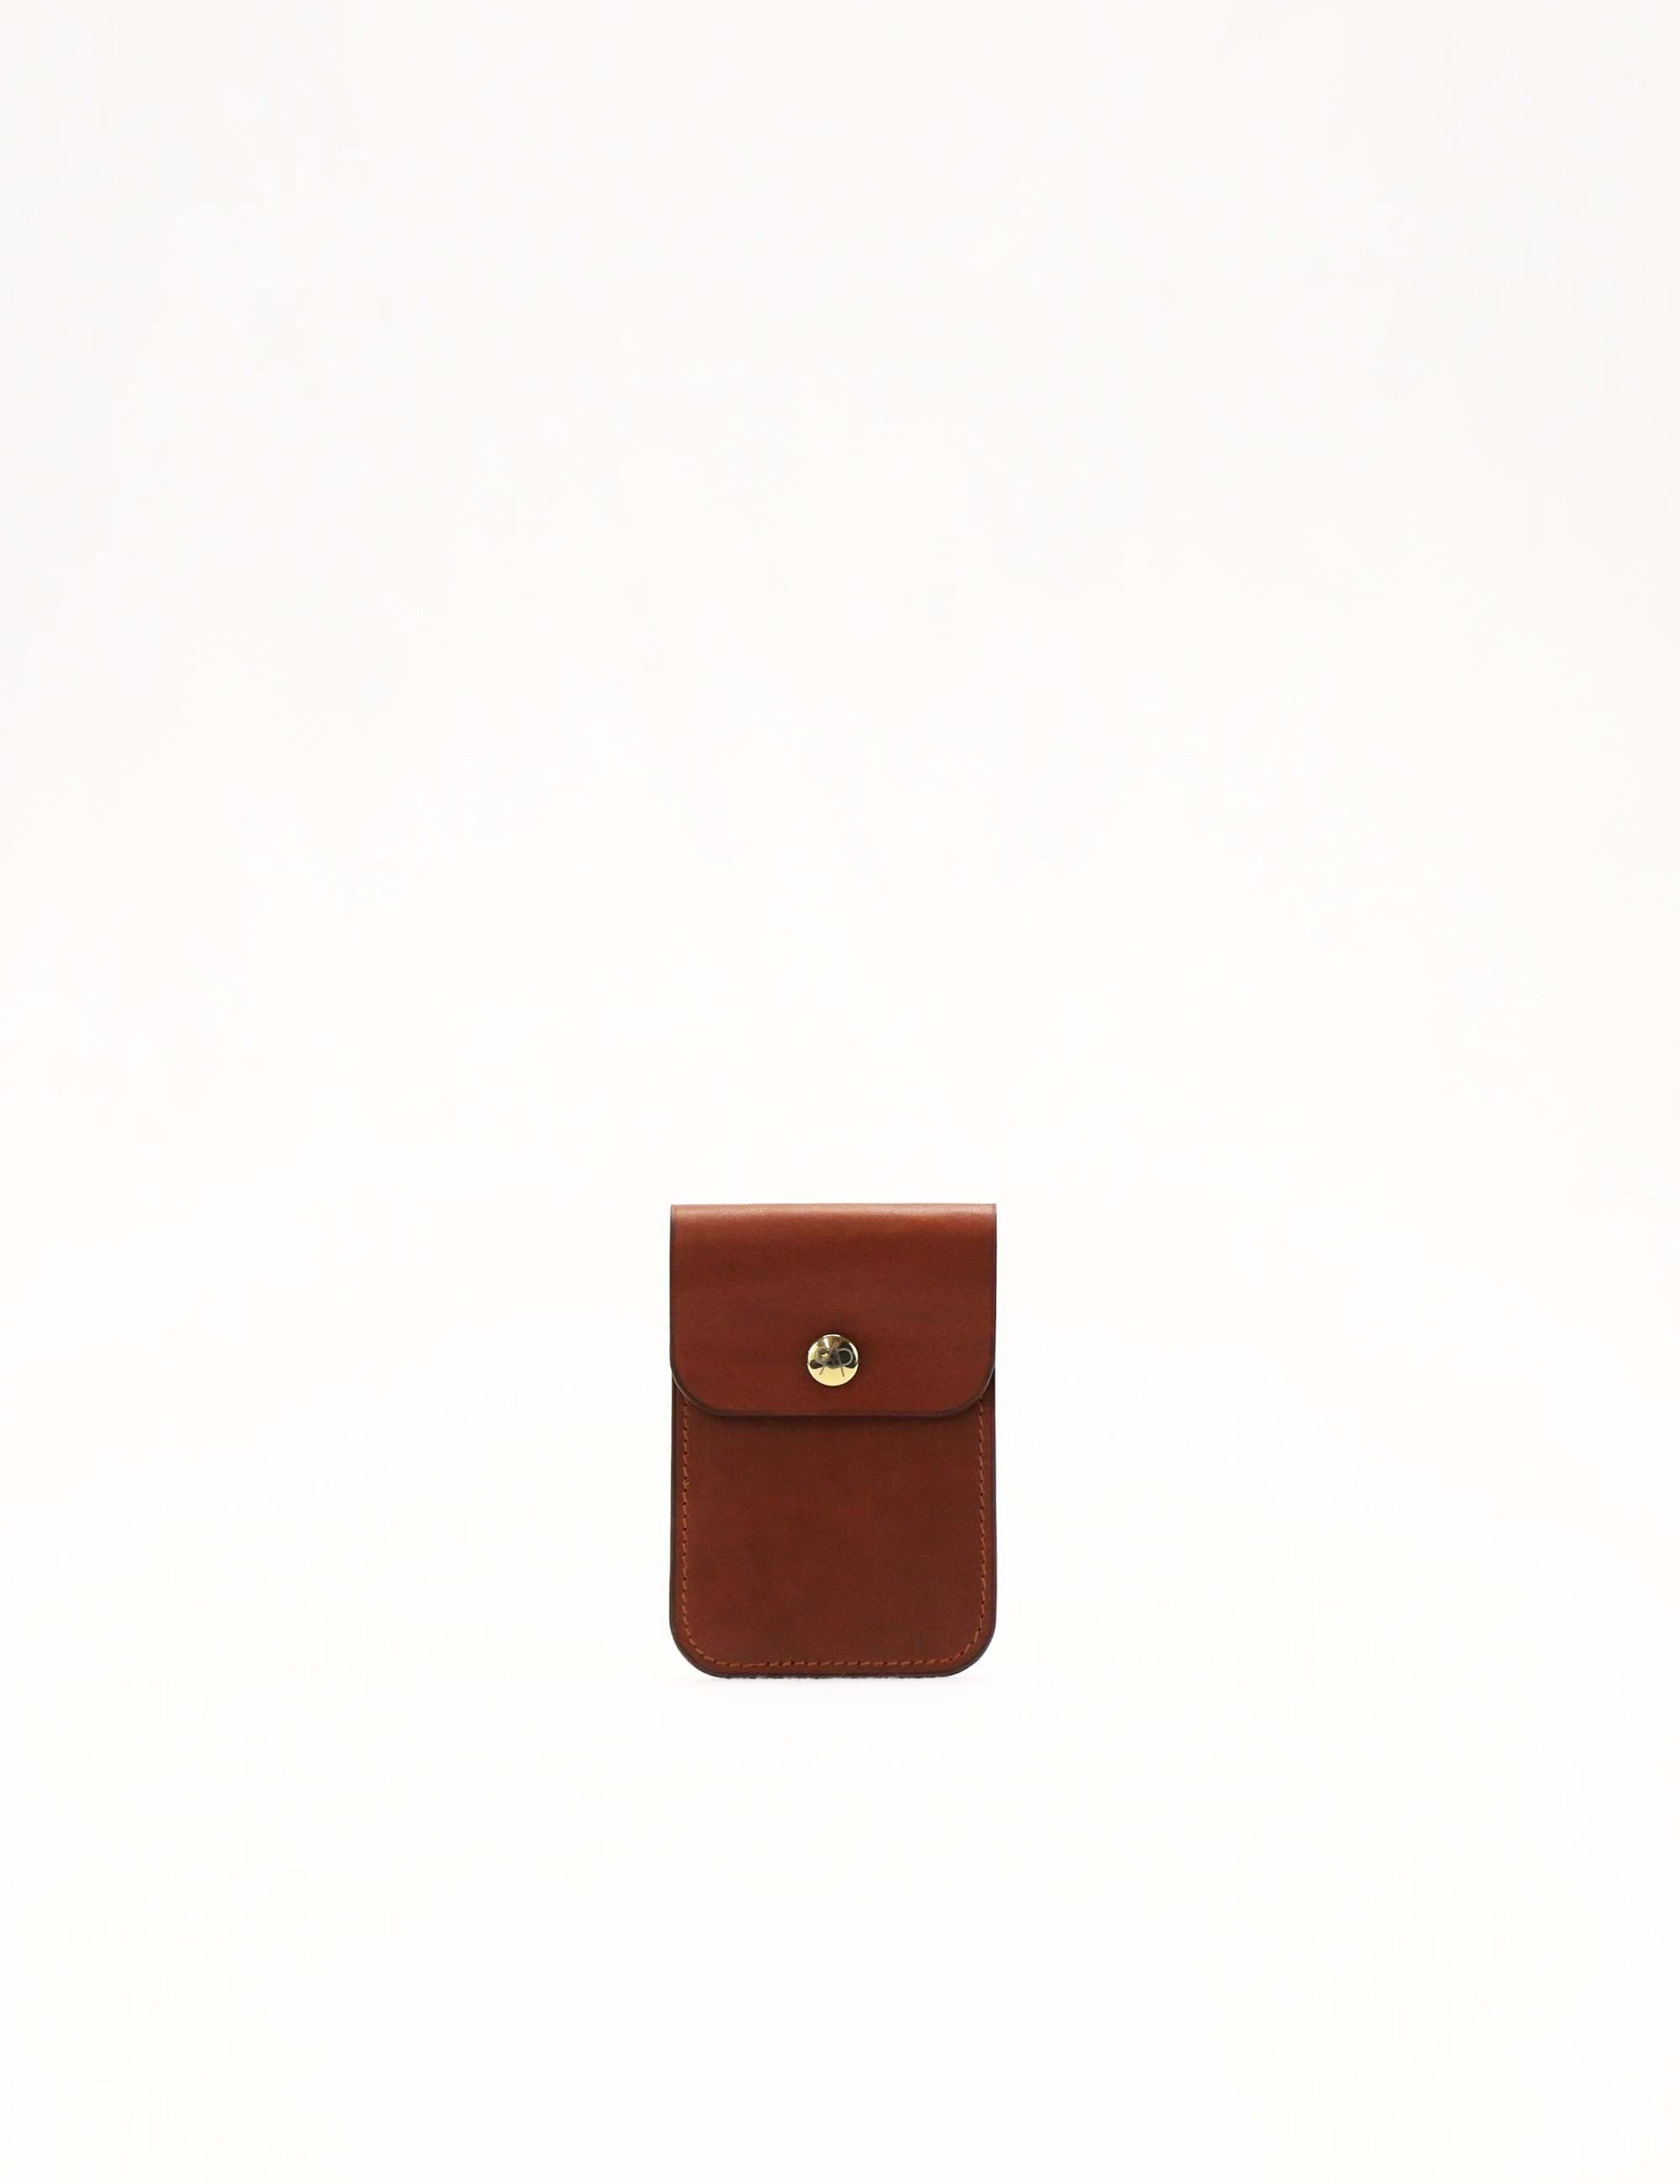 Card Holder - Orange Smooth Leather – Ateliers Auguste